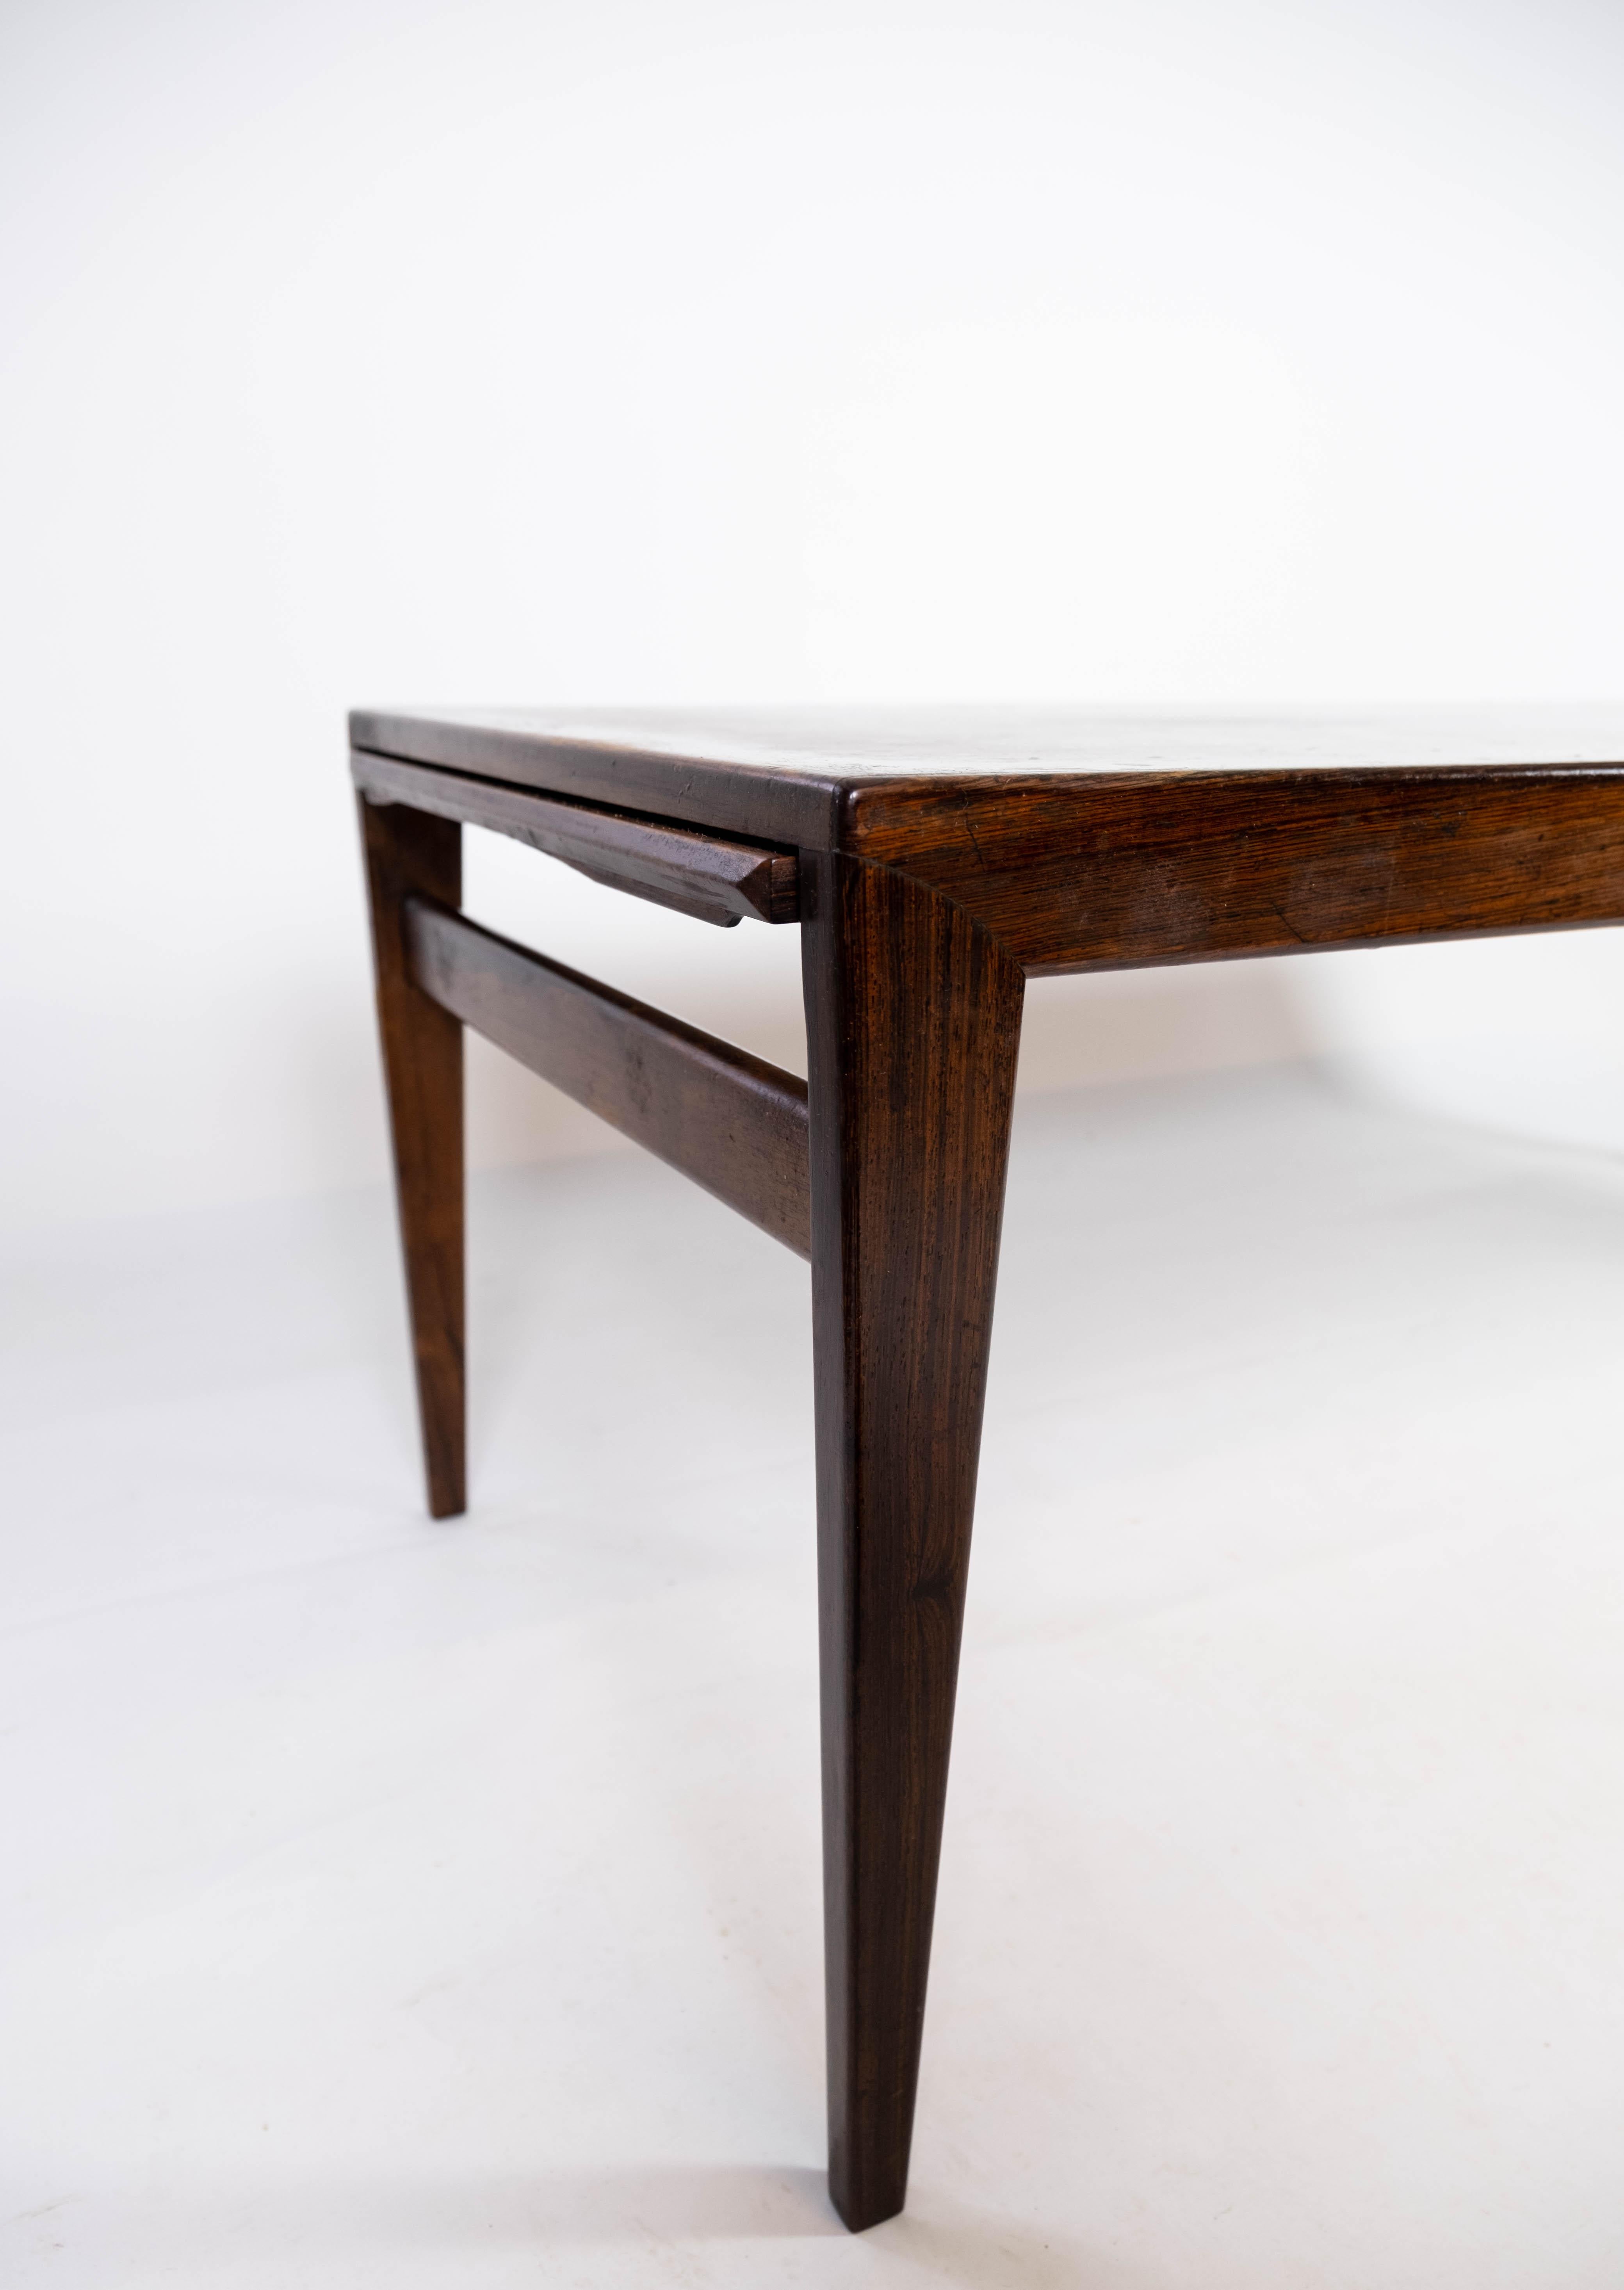 Scandinavian Modern Coffee Table in Rosewood of Danish Design from the 1960s